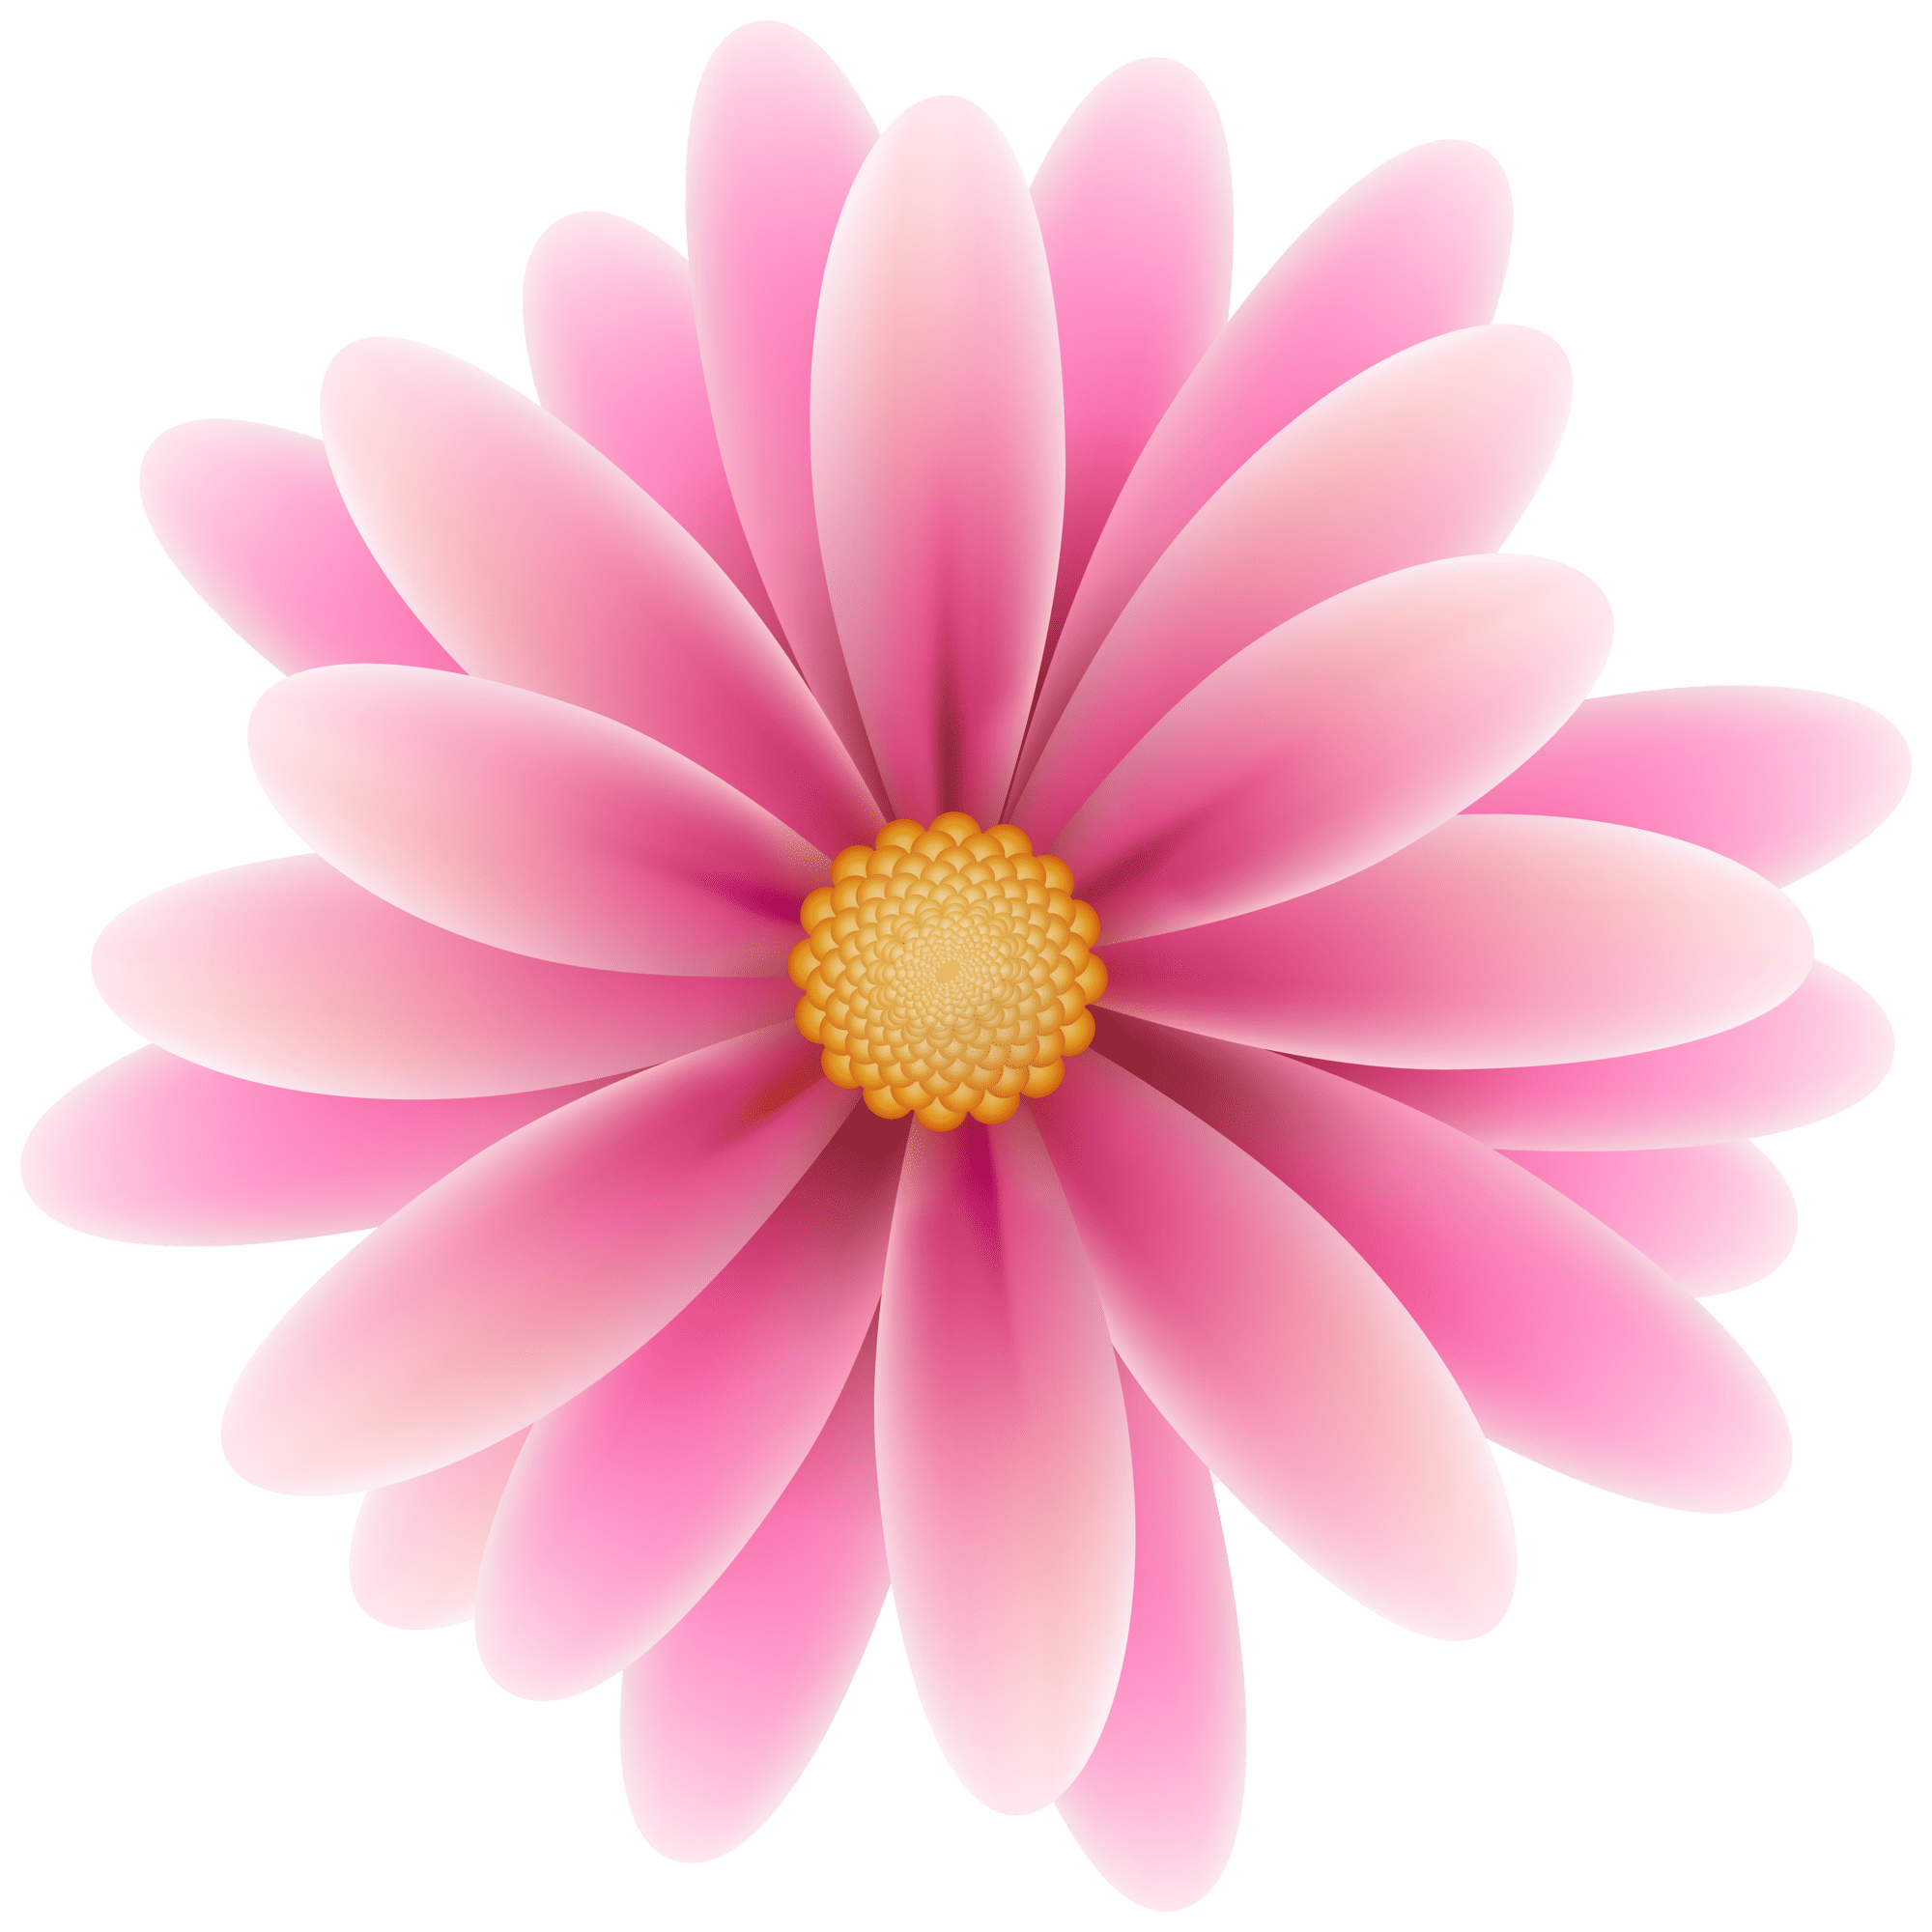 Pink flower clipart image high